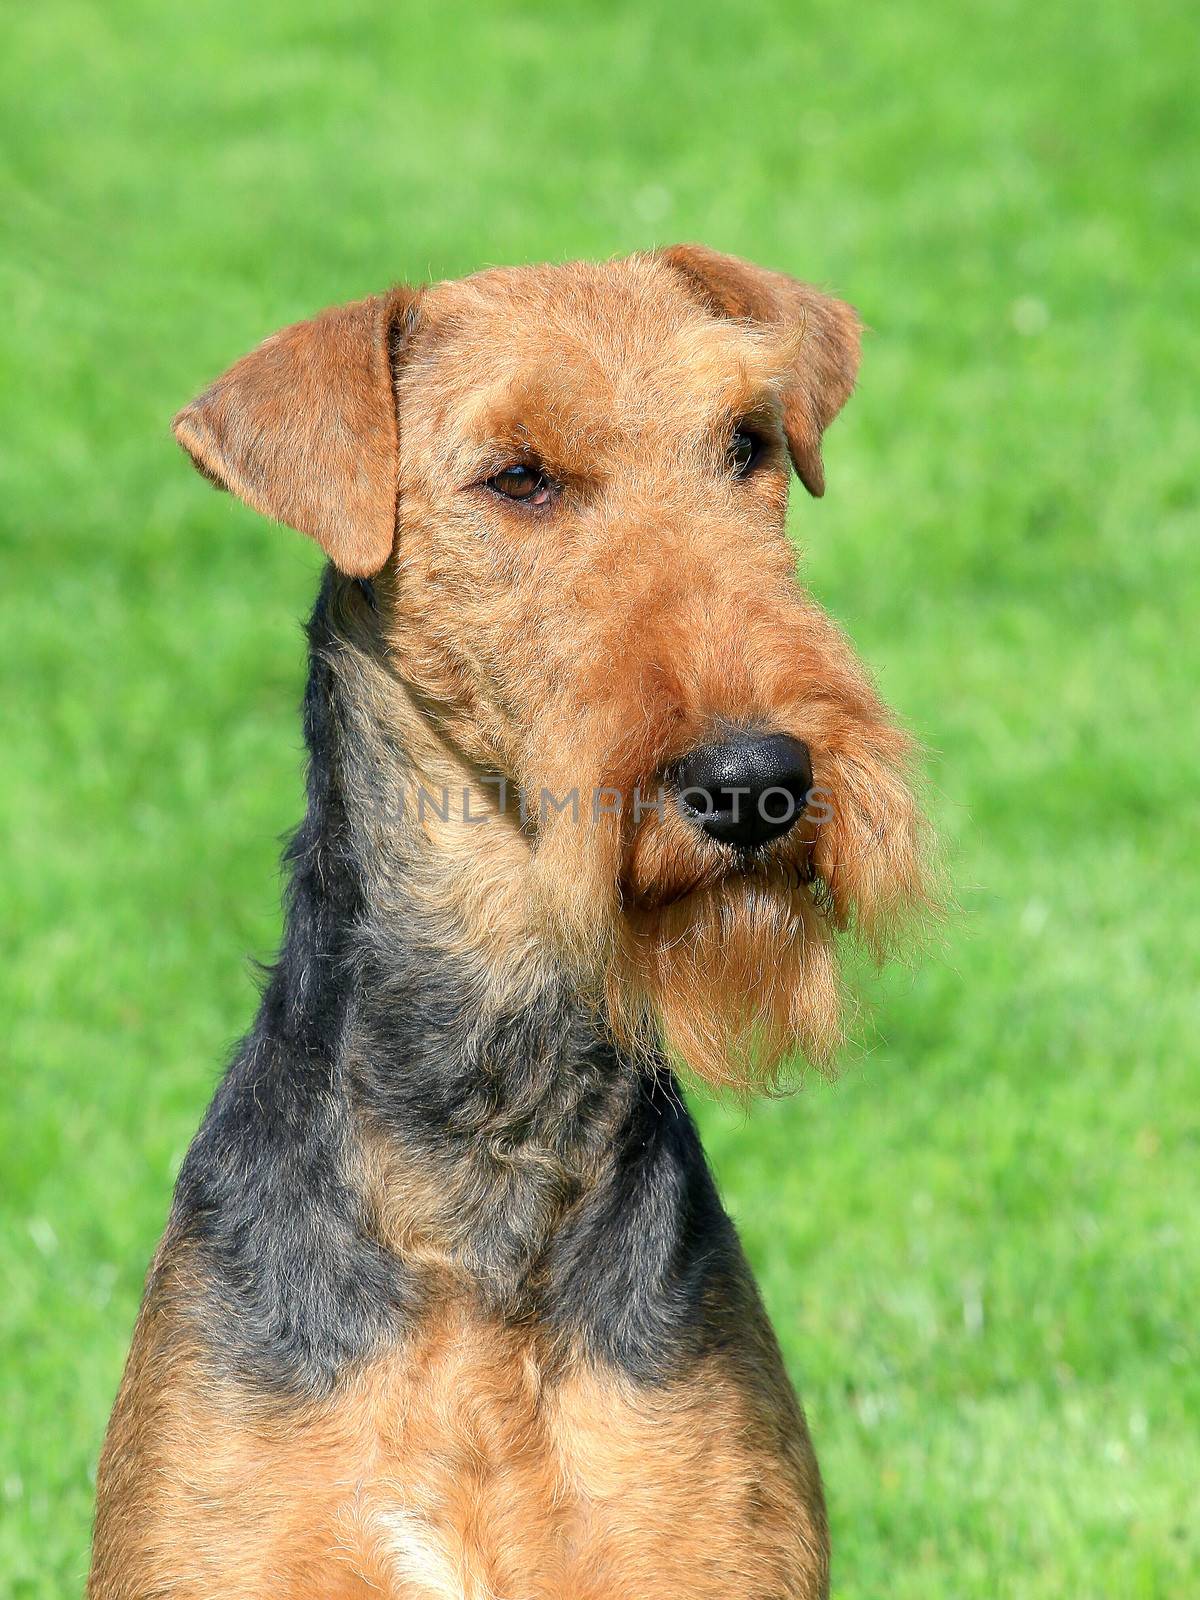 The portrait of typical Airedale Terrier